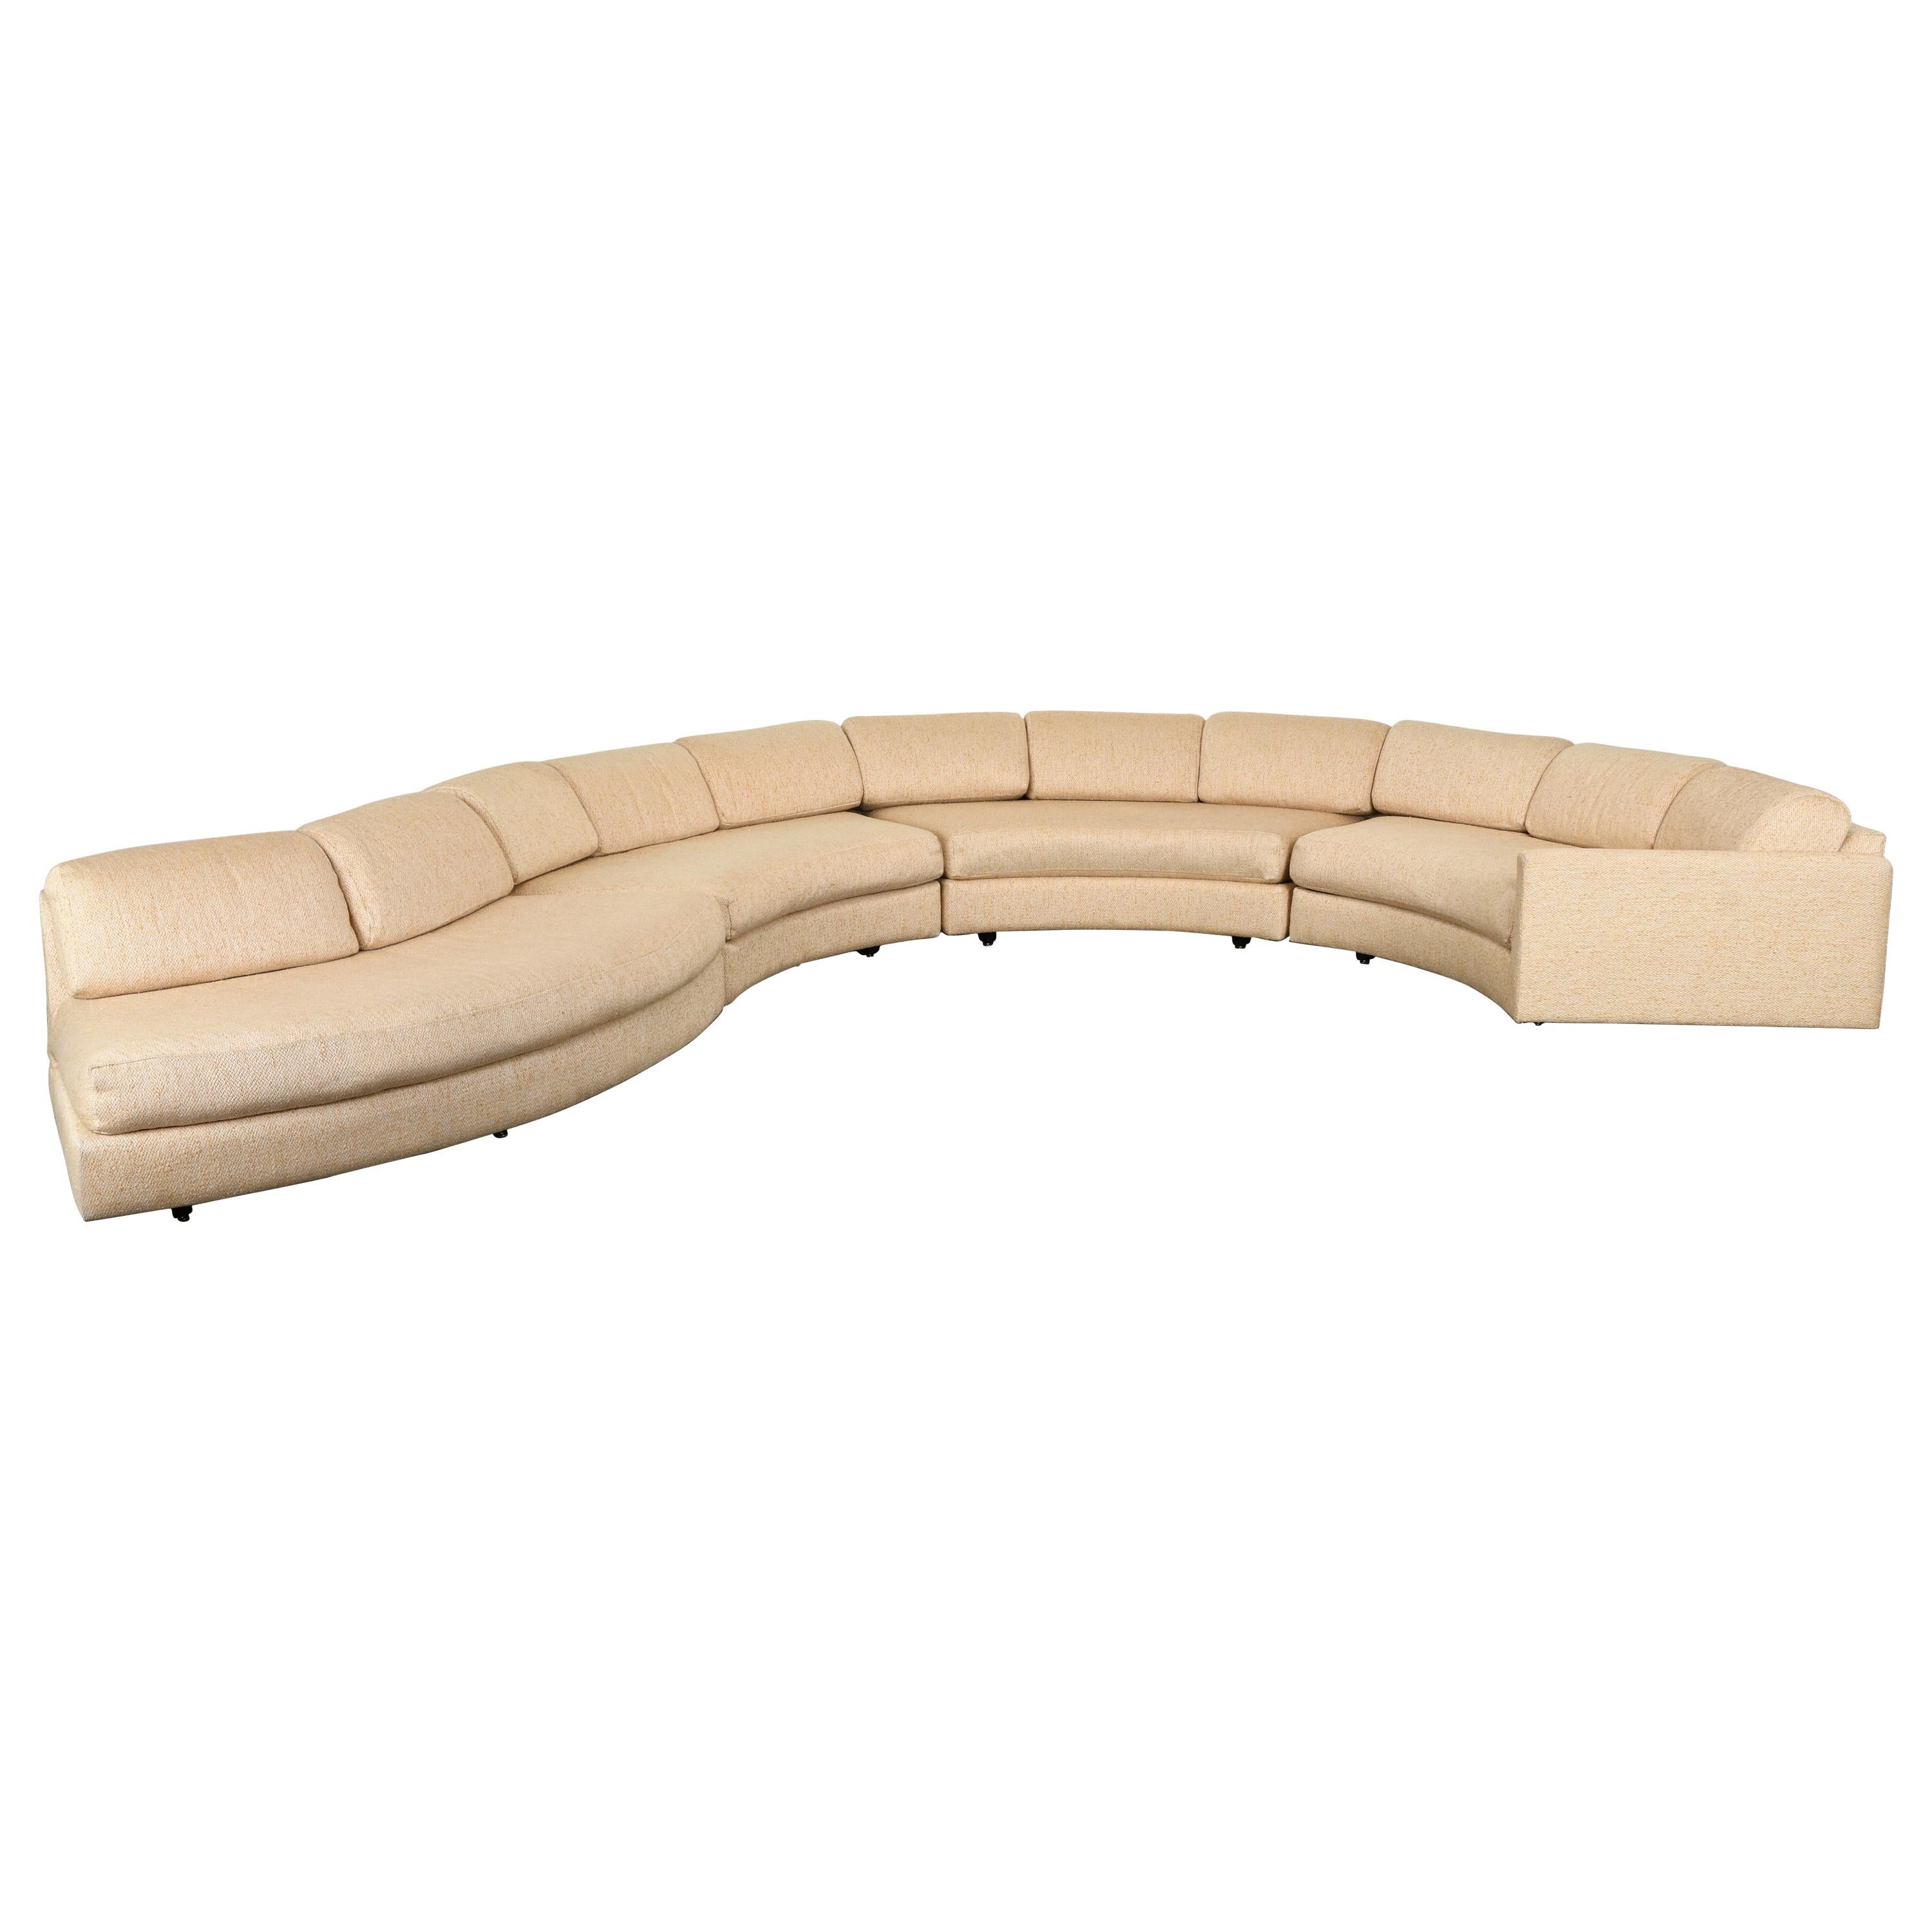 Monumental Adrian Pearsall Sectional Sofa for Craft Associates, 1960s